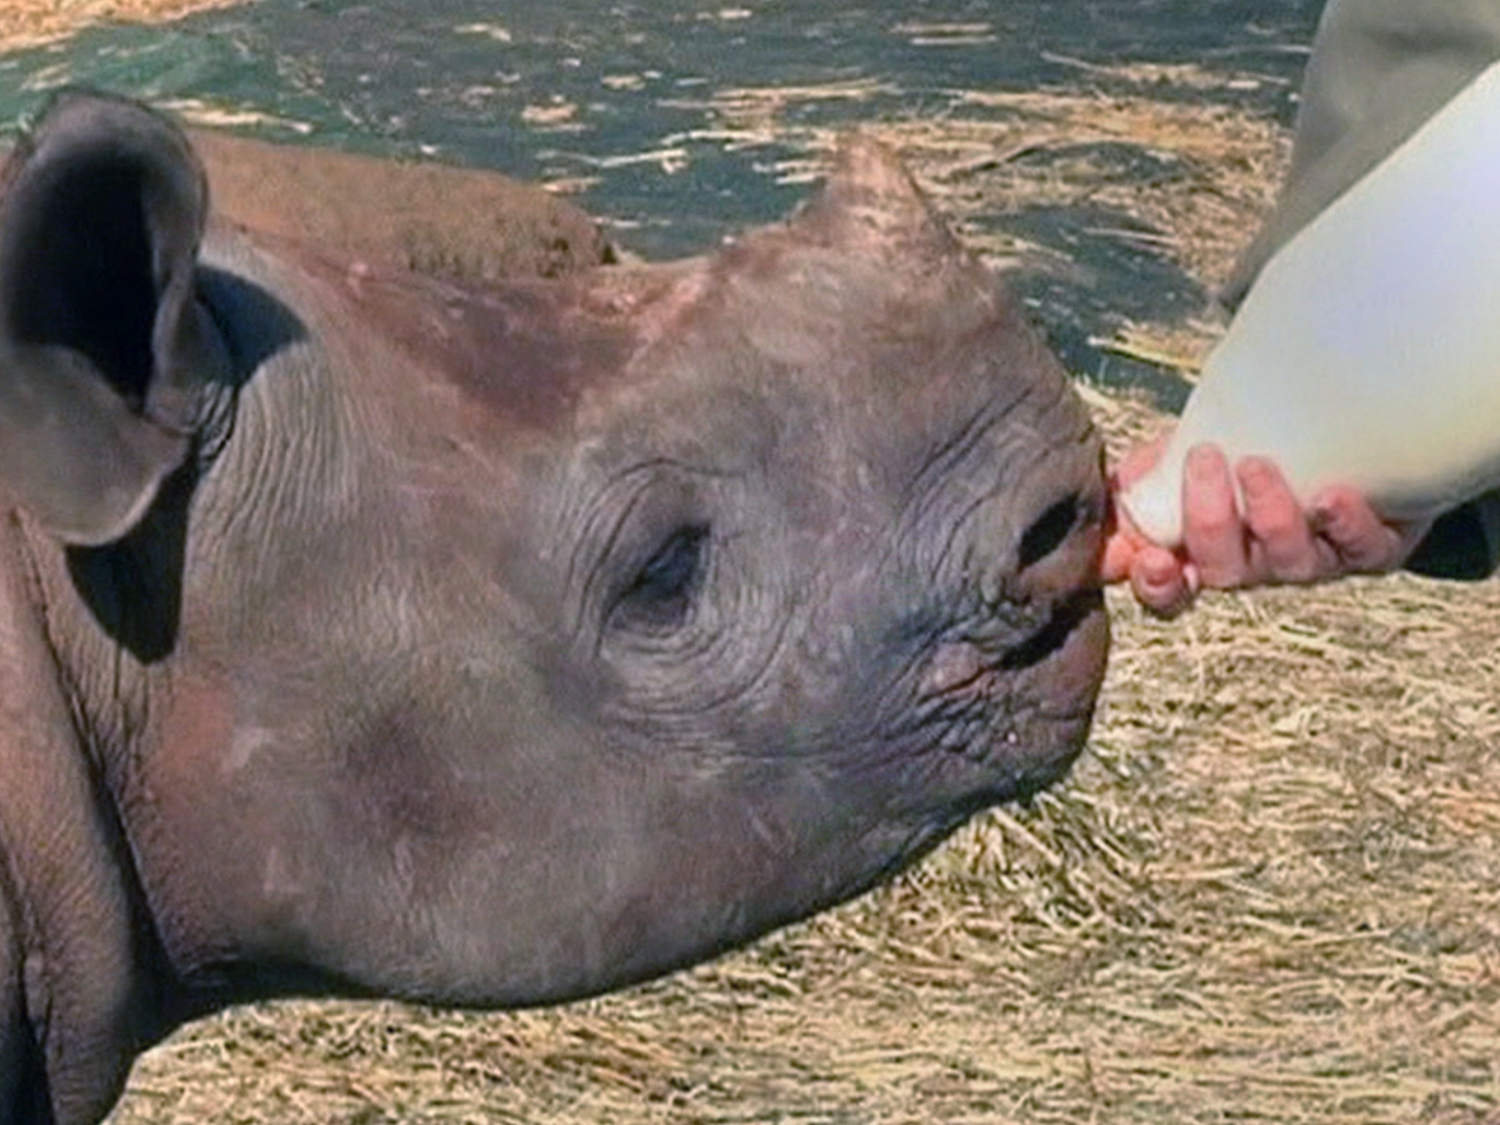 South Africa opens rhino orphanage